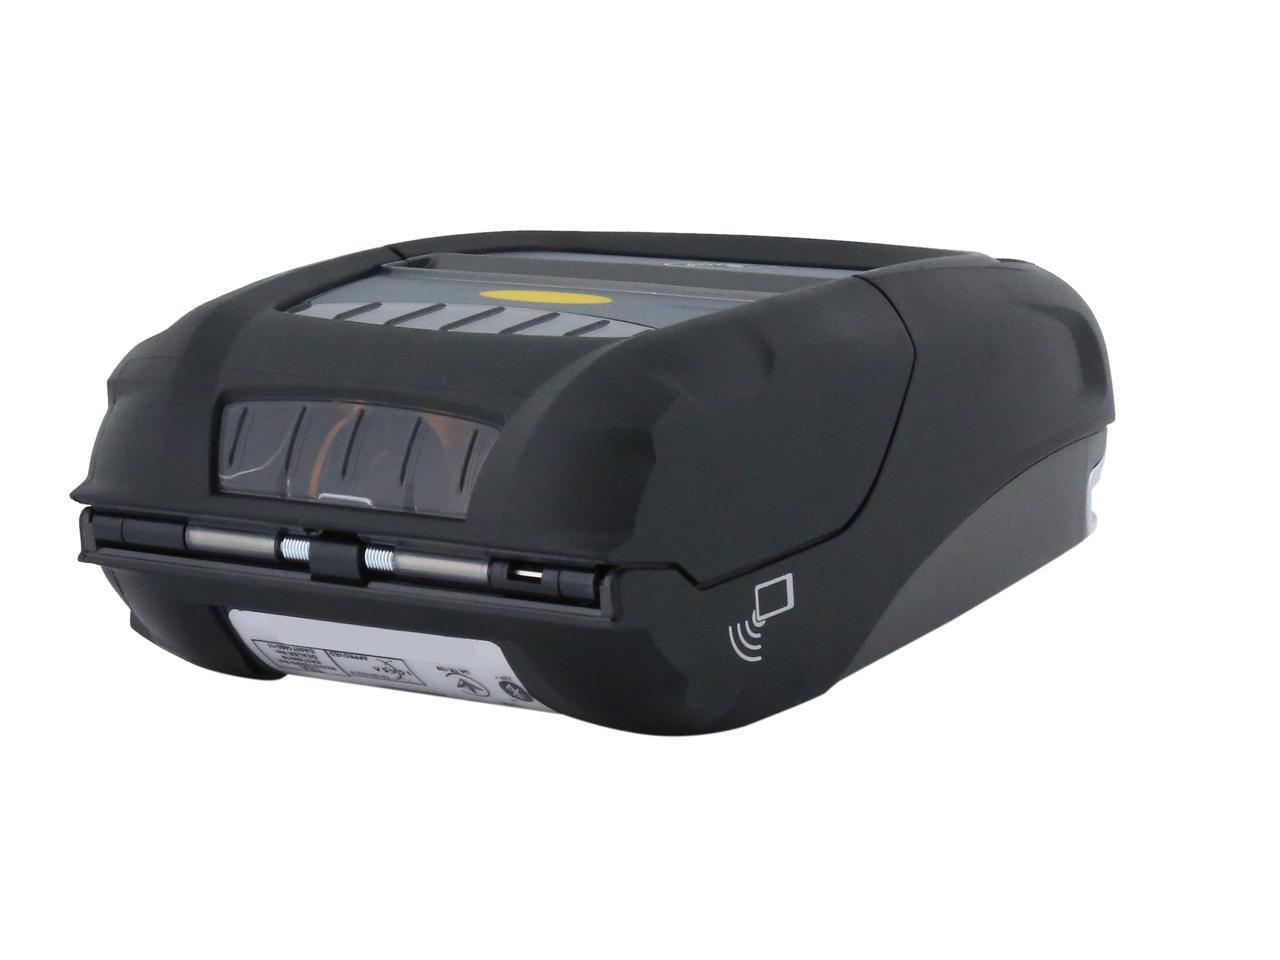 Zebra Zq510 3 Mobile Direct Thermal Receipt And Label Printer 203 Dpi Bluetooth 40 Linered 3879